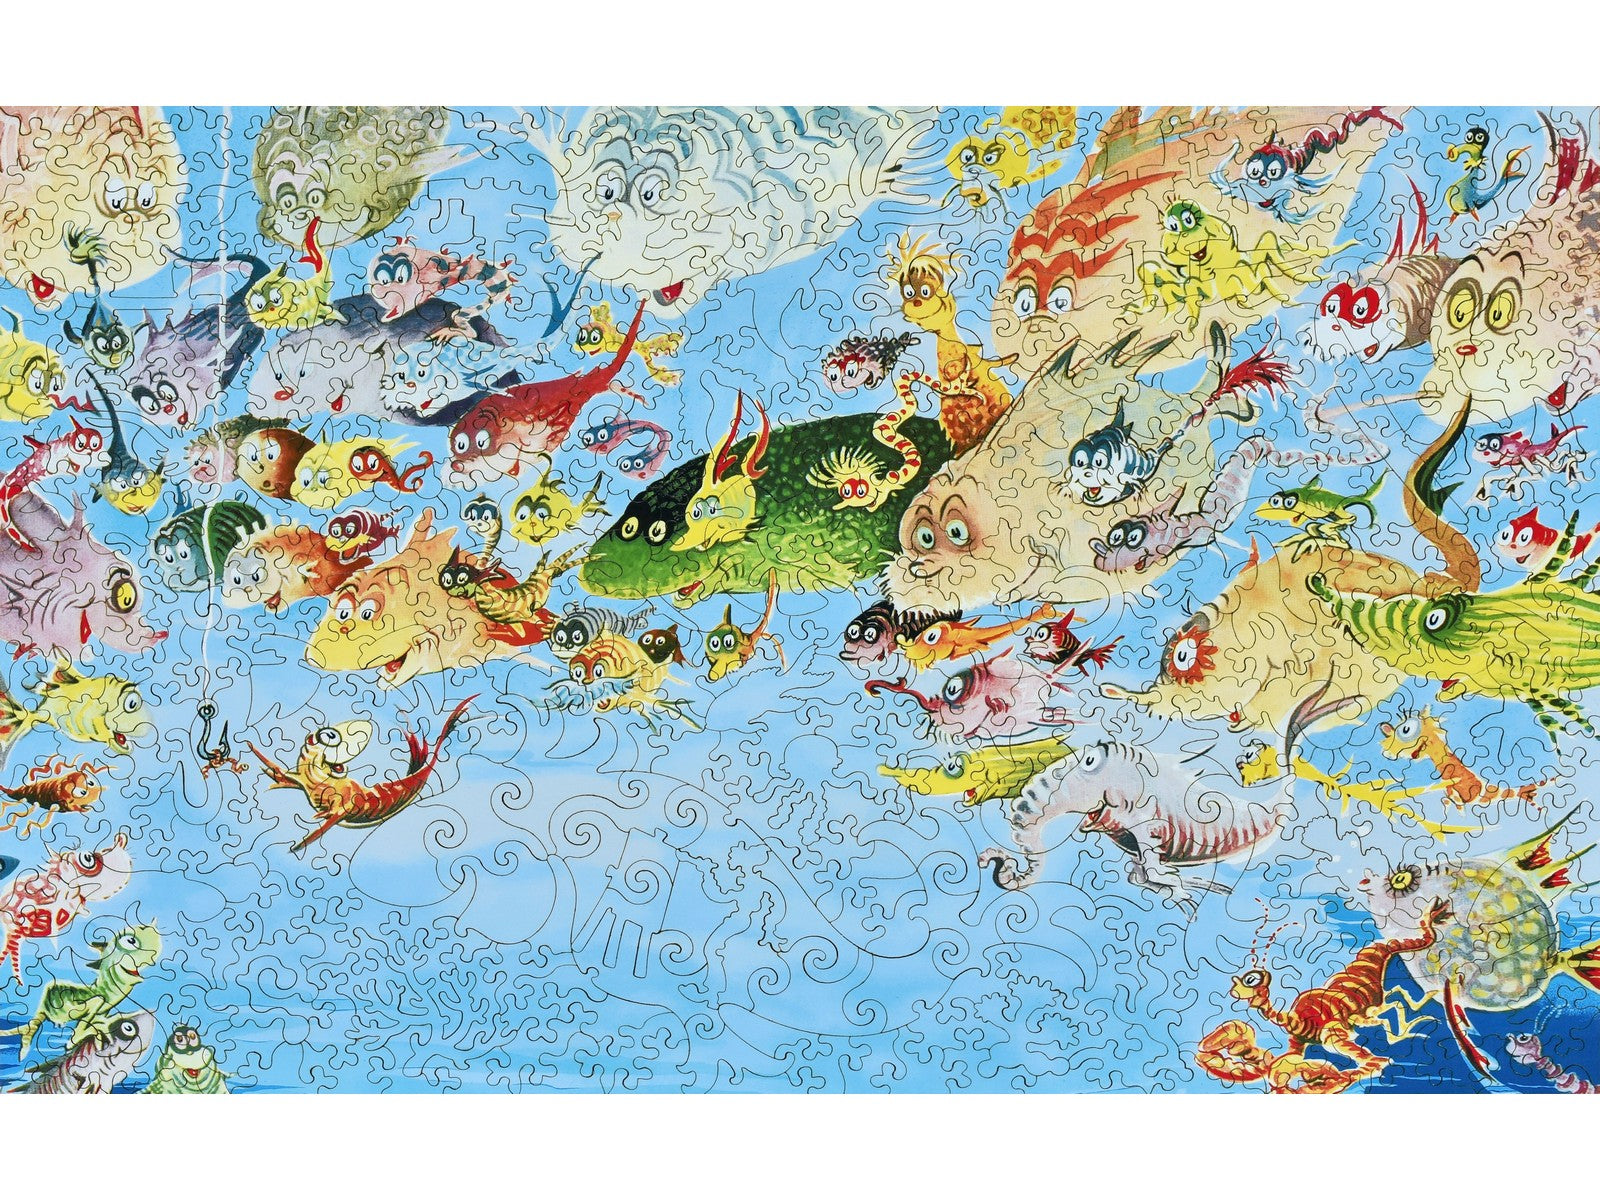 The front of the puzzle, A Plethora of Fish, which shows many fish crowding around a hook with a worm.